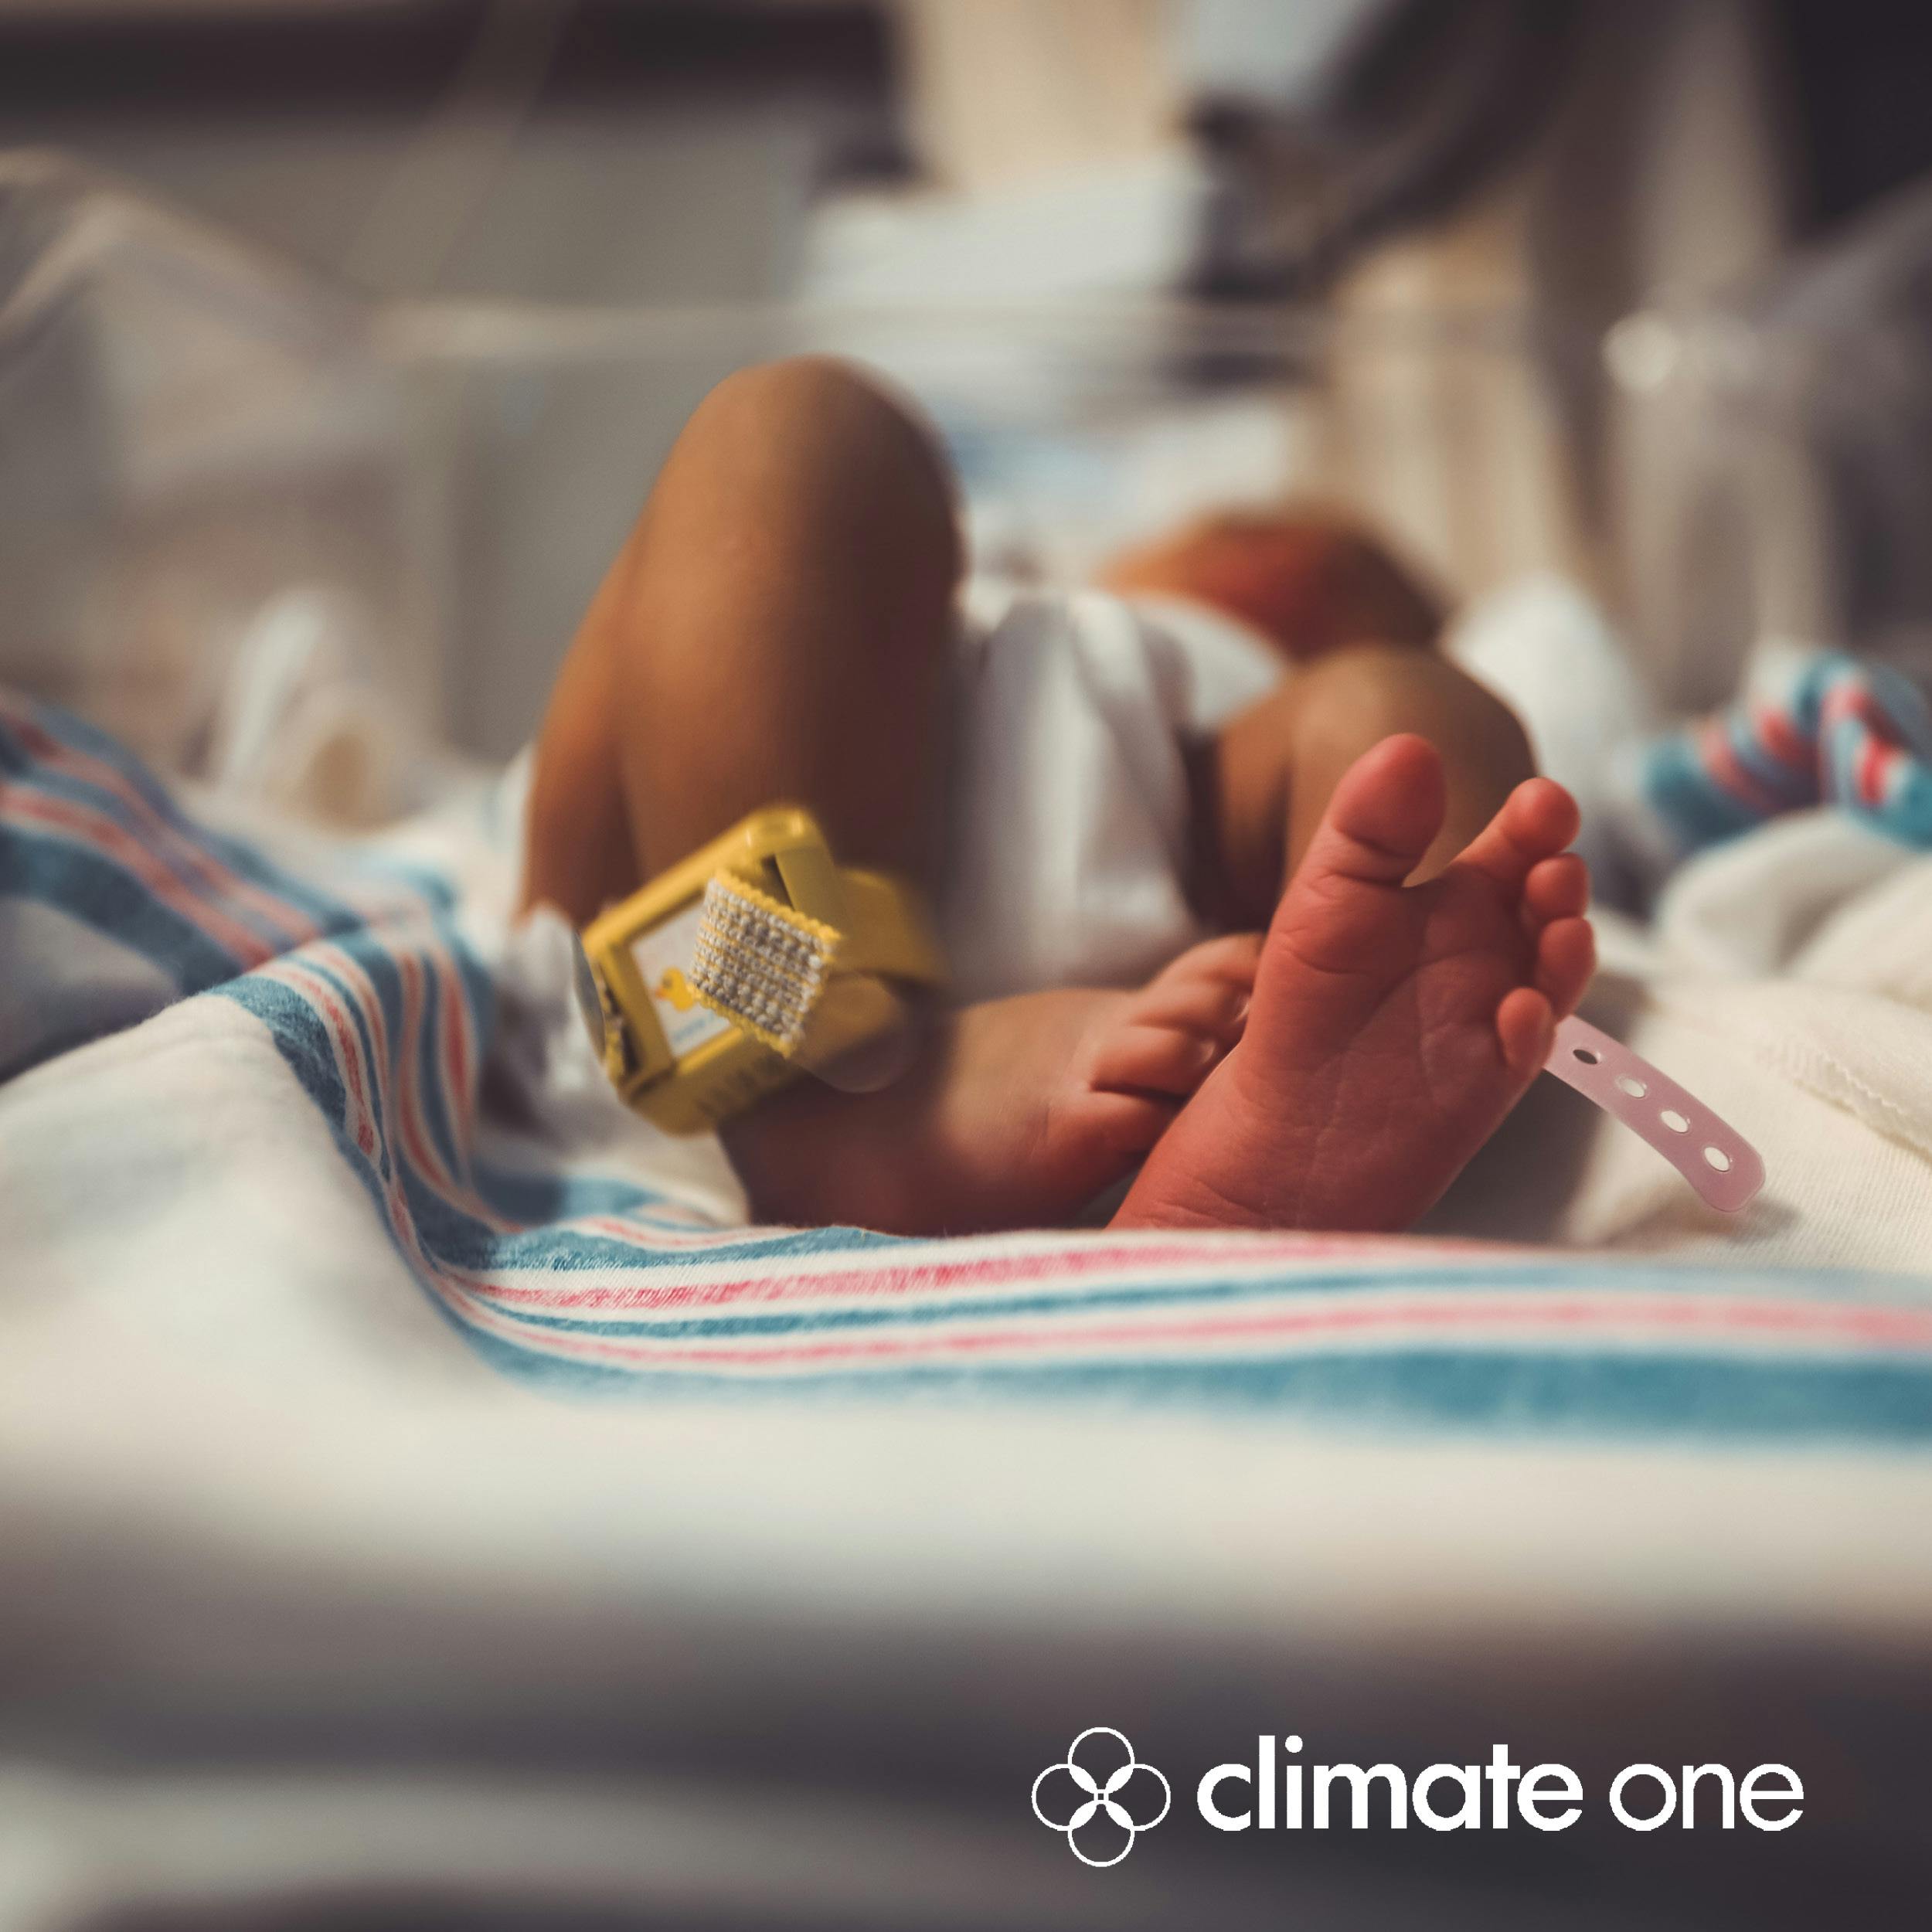 Should We Have Children in a Climate Emergency?